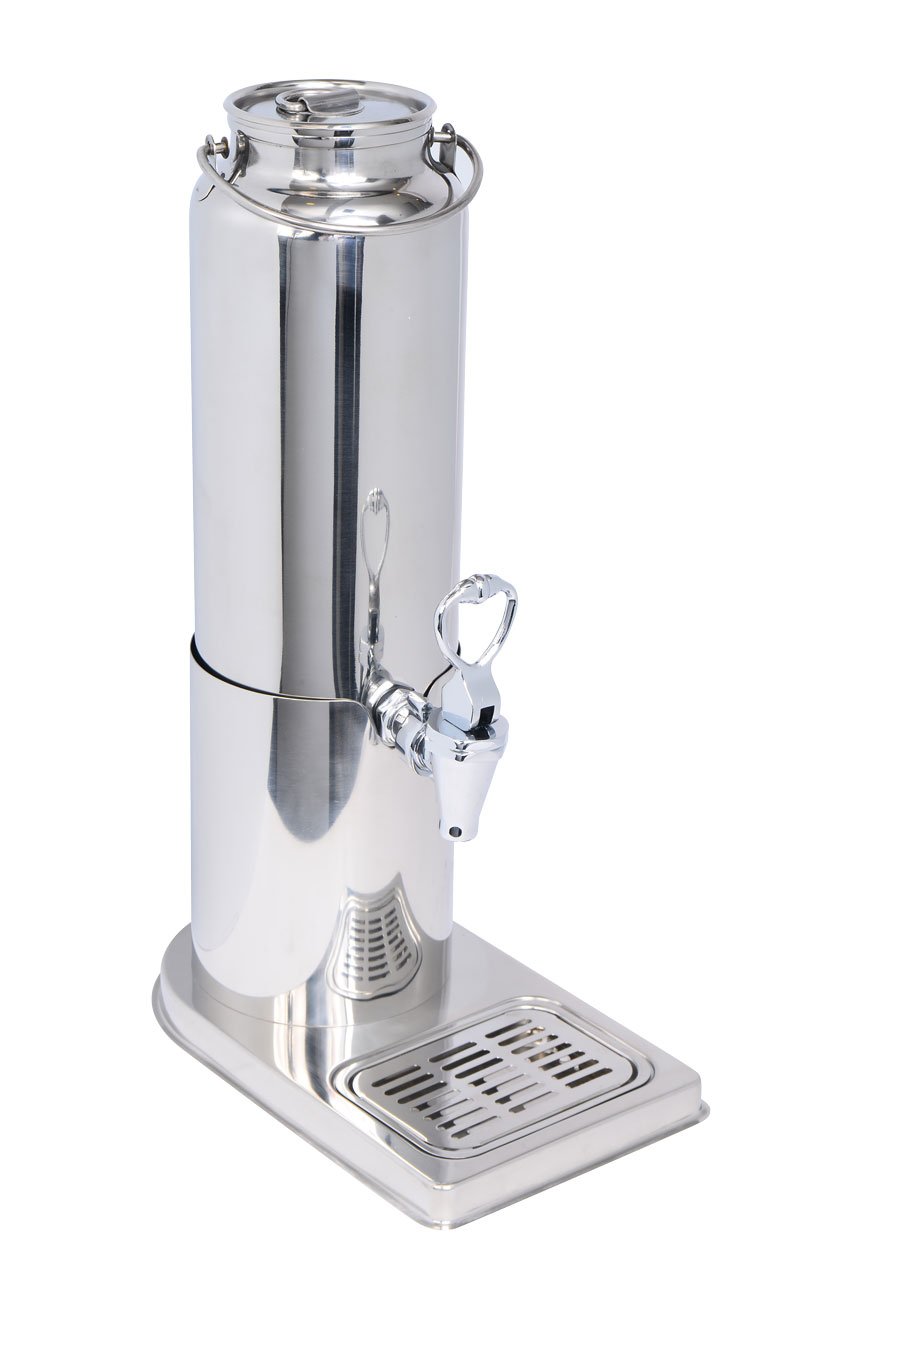 Eastern Tabletop 7592CP 2 Gallon Copper Coated Stainless Steel Hot Beverage  Dispenser with Acrylic Container and Fuel Shelf